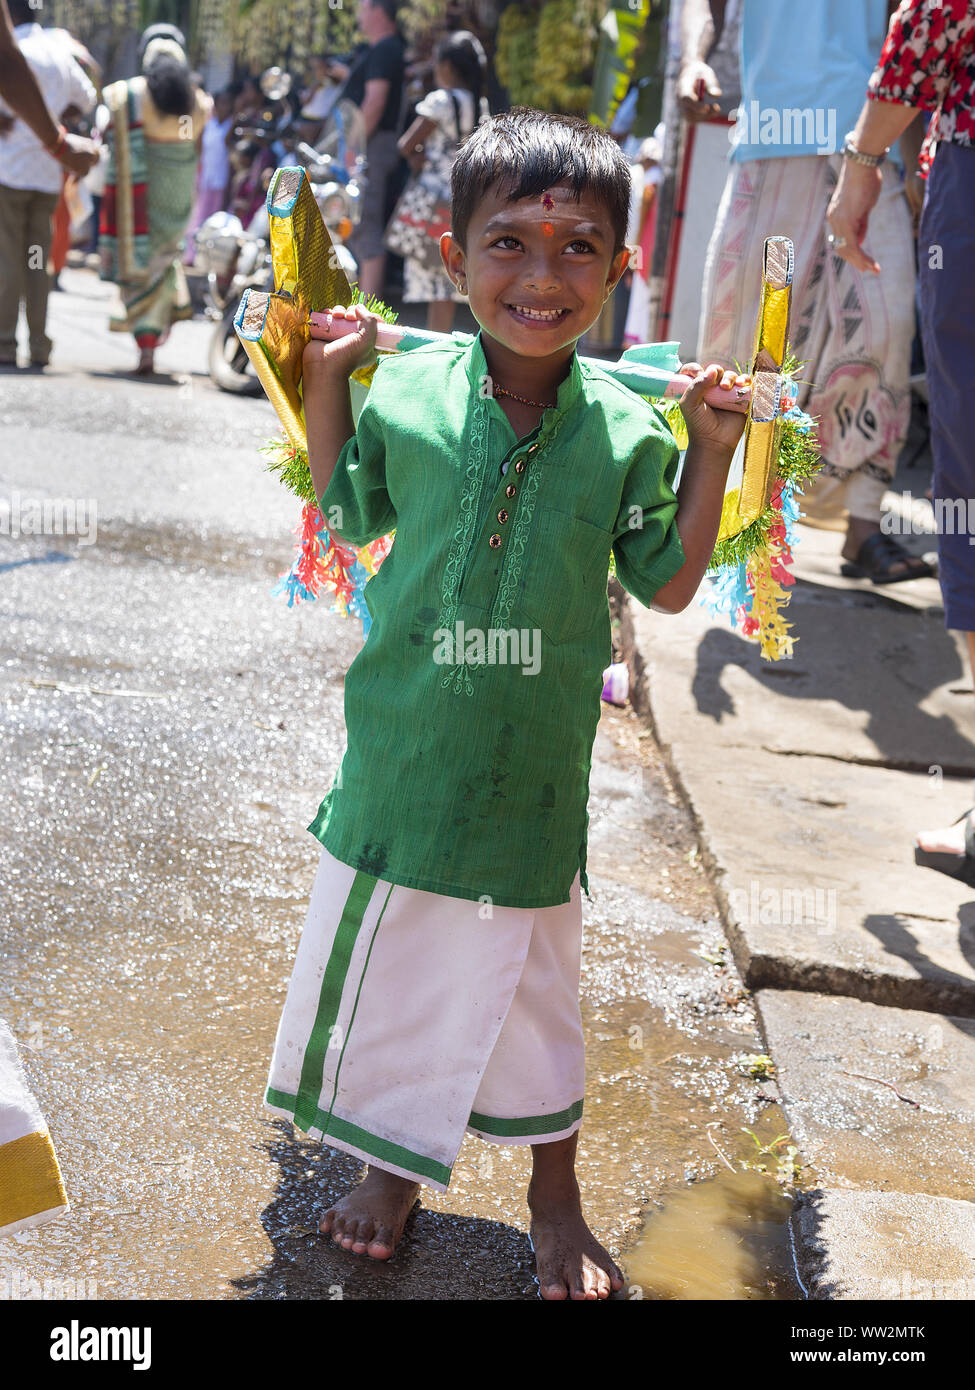 Pussellawa, Sri Lanka,  03/20/2019: Hindu festival of Thaipusam - body piercing rituals under the blood moon. Boy with shoulder weights. Stock Photo